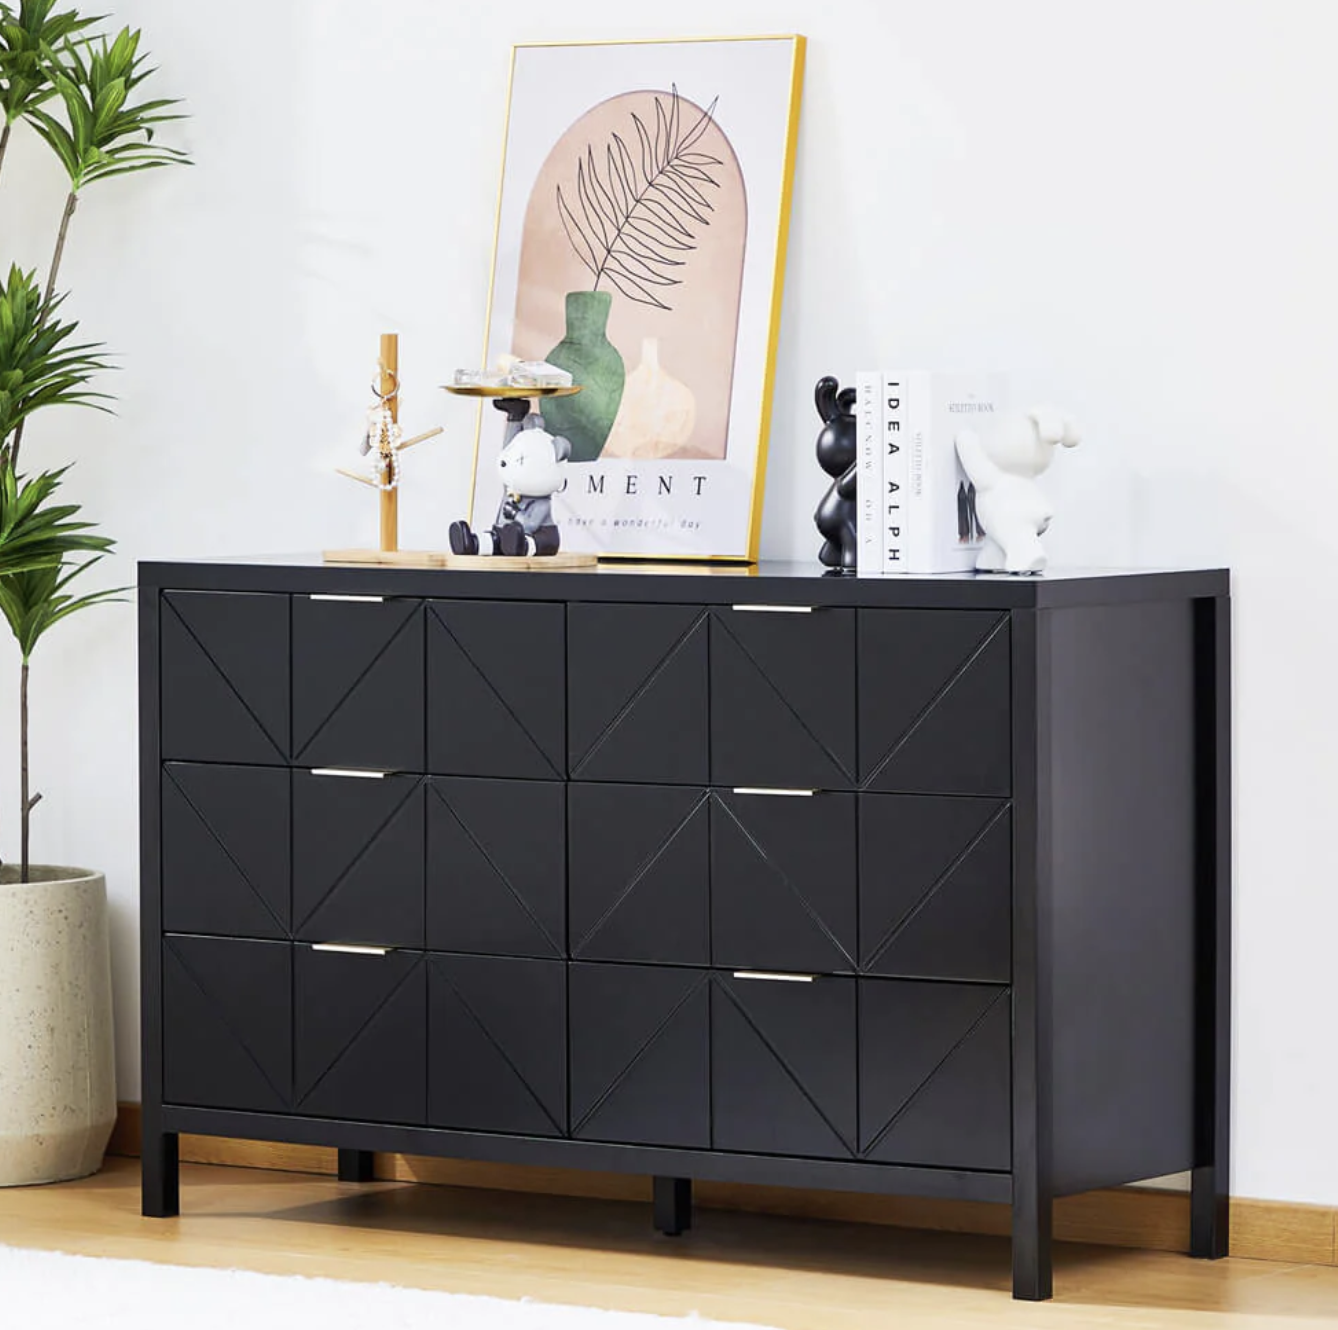 GiraTree Launches A New Line of Sustainable and Stylish Home Furniture